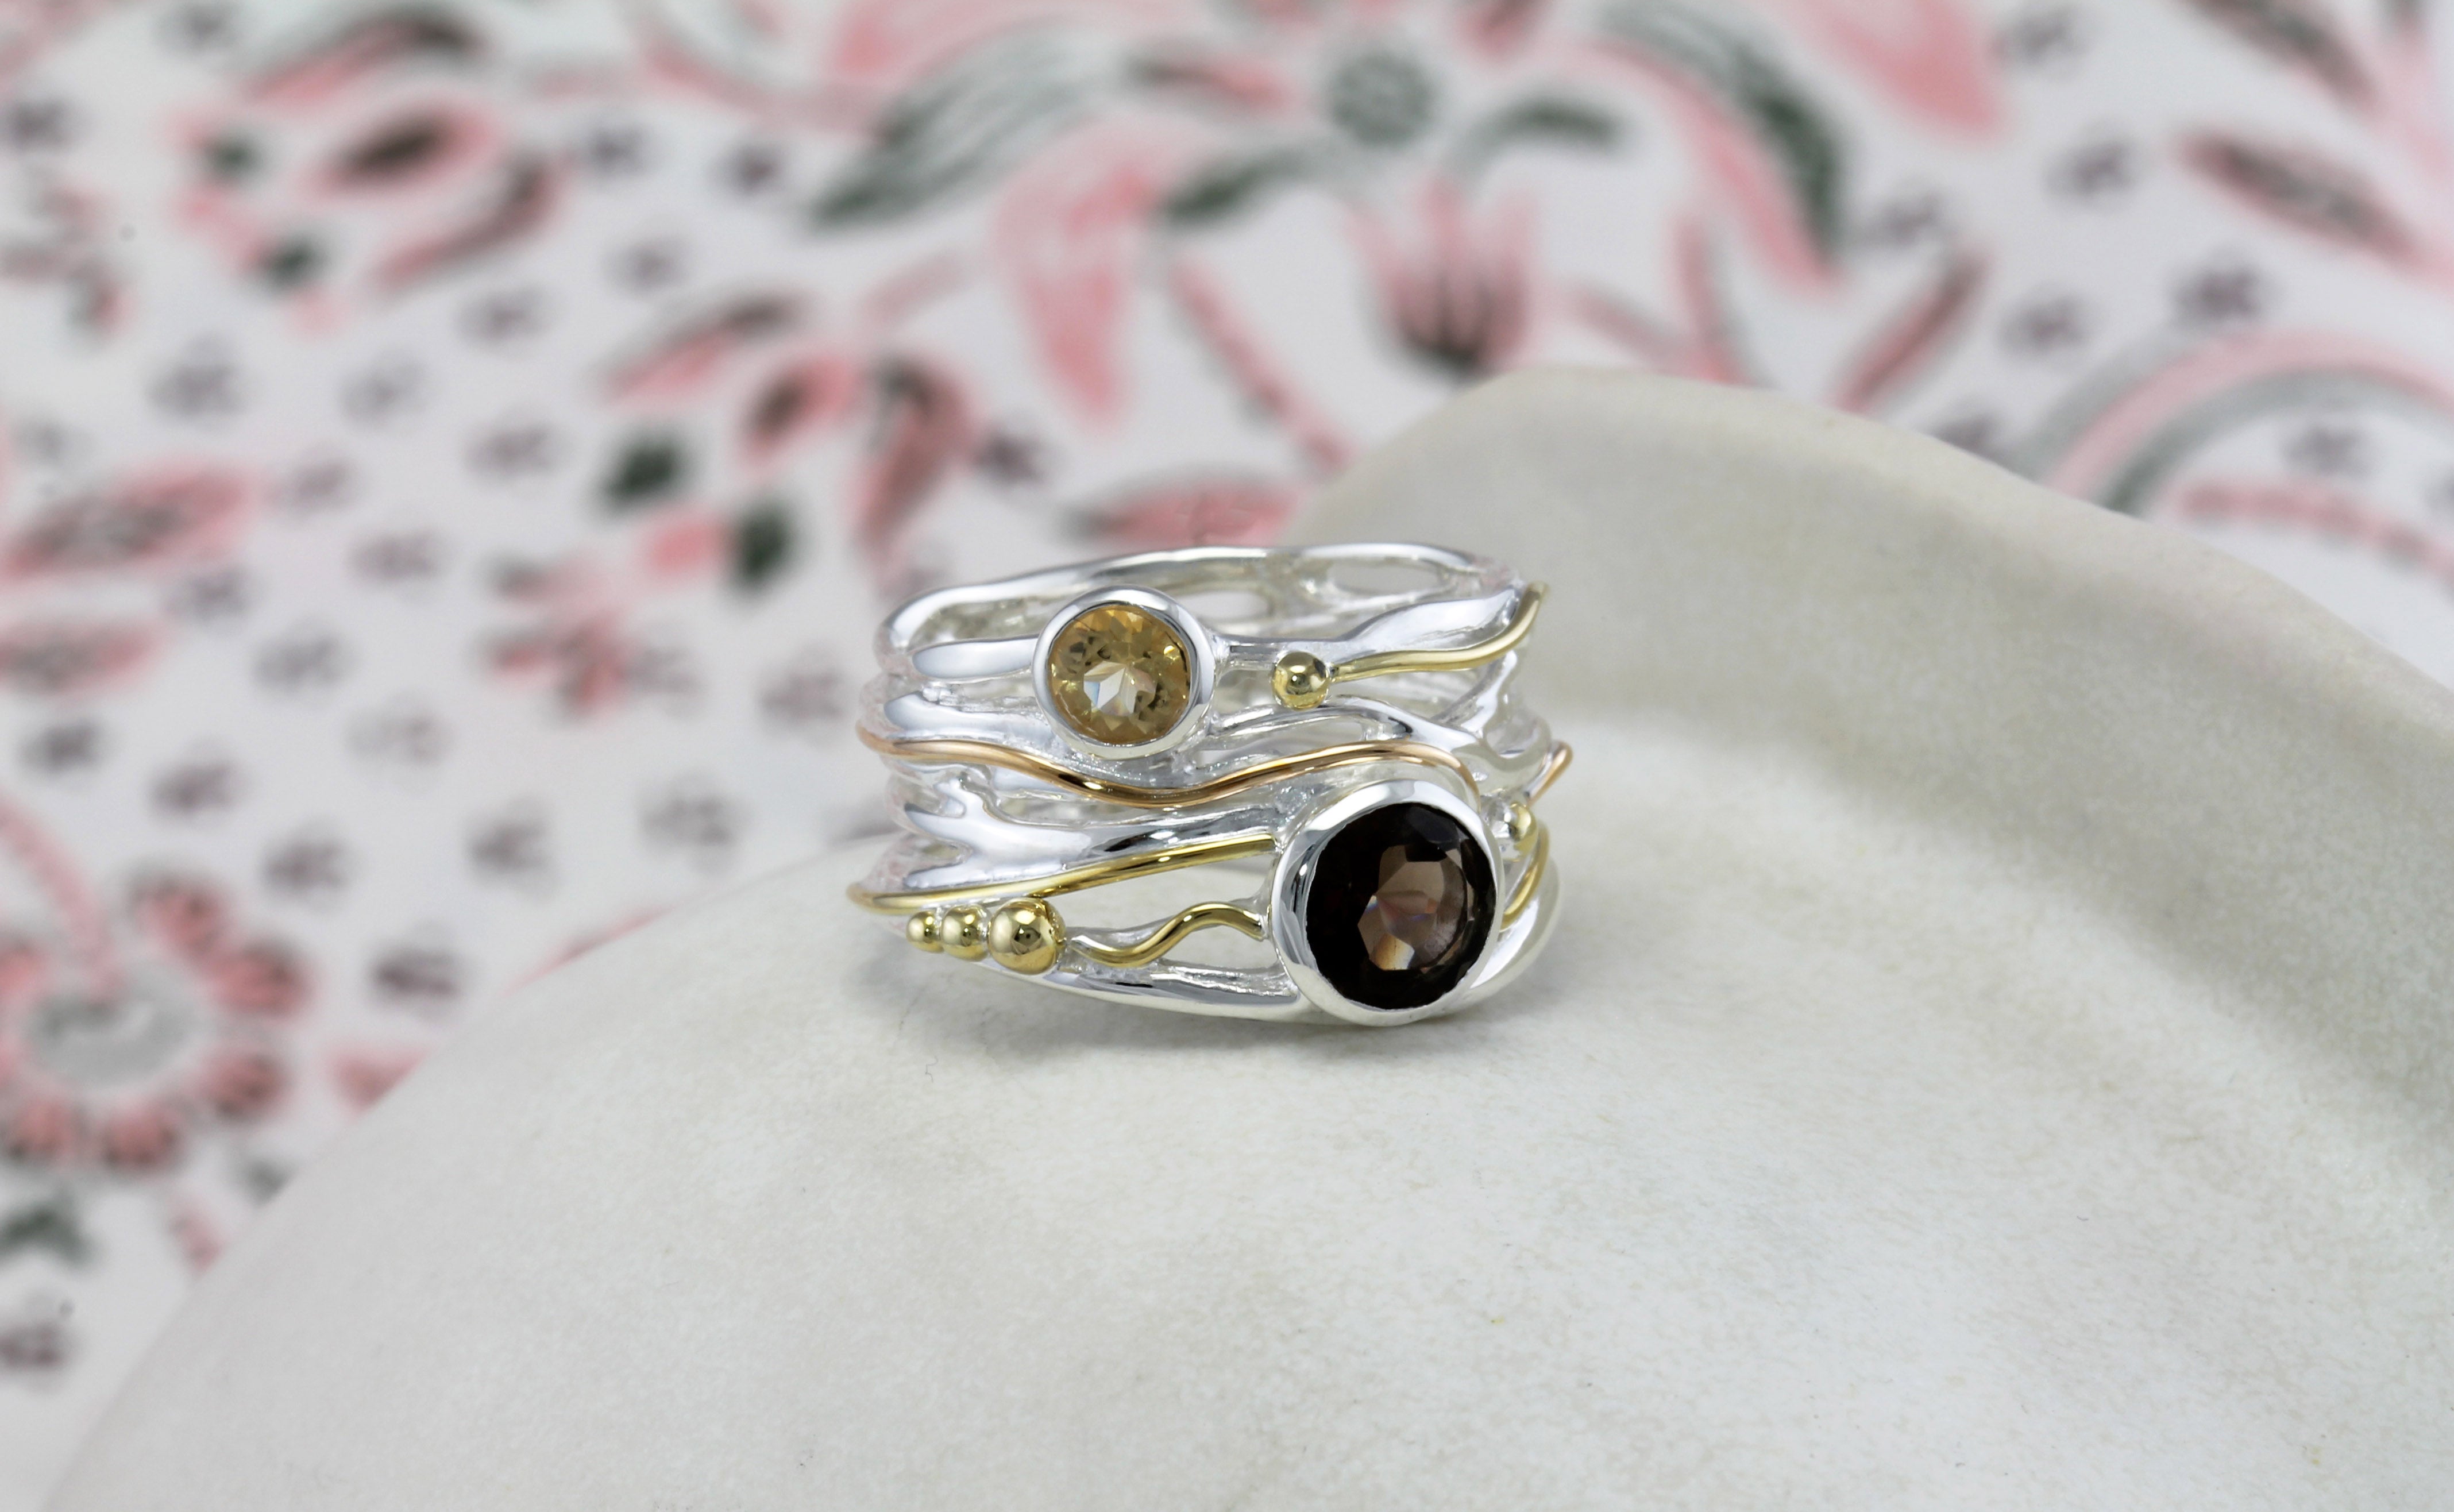 Smoky Quartz & Citrine Ring in Sterling Silver with Gold Details